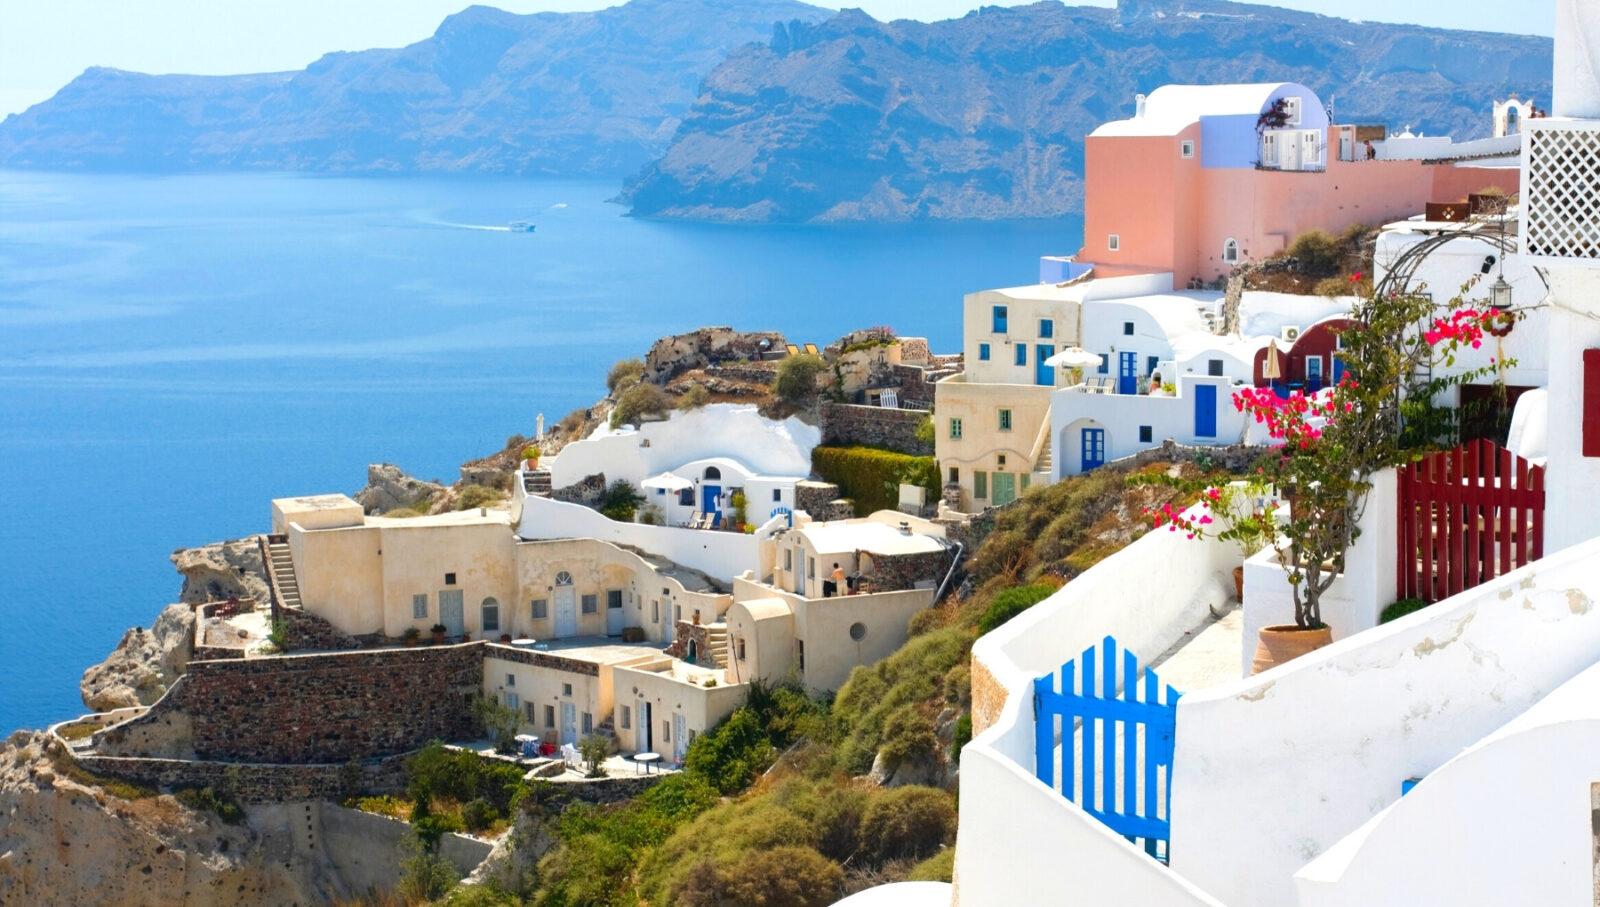 17.087 m² PLOT WITH 5-STAR HOTEL BUILDING PERMIT FOR SALE IN SANTORINI, GREECE